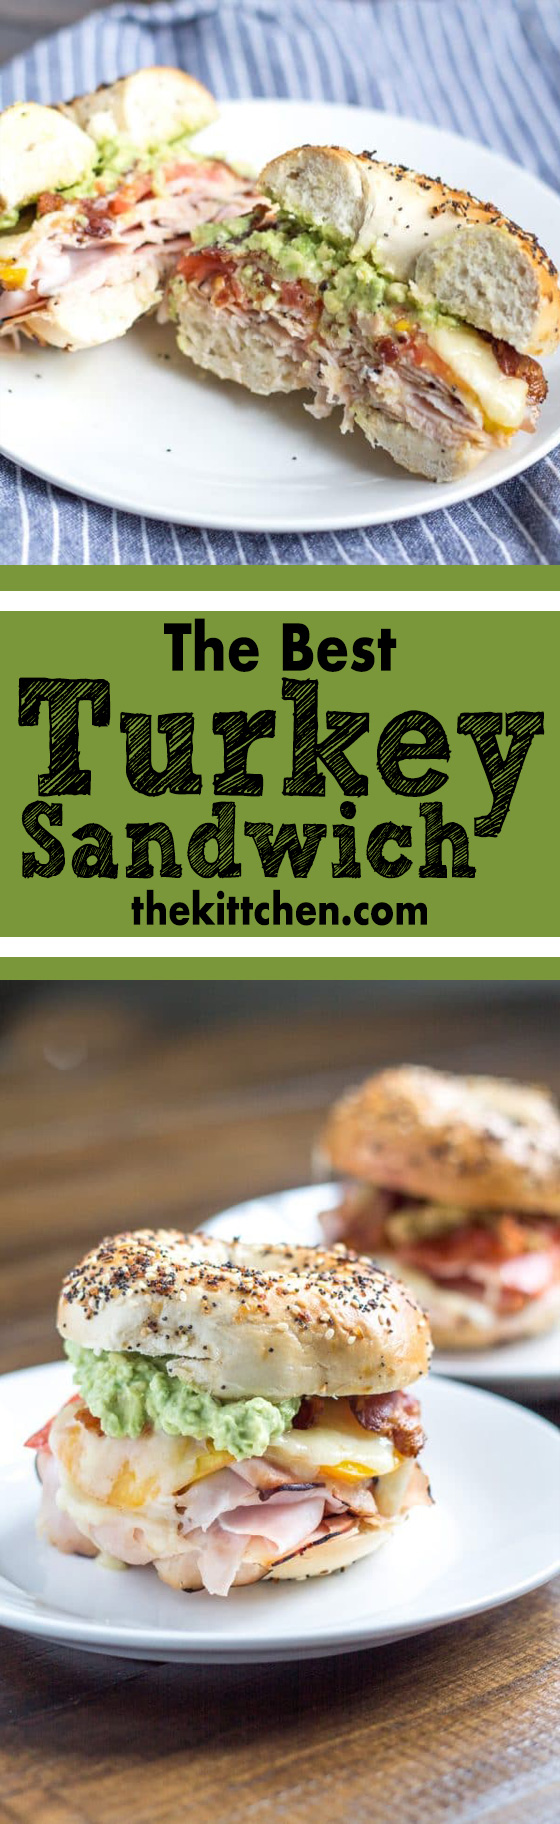 I am sharing my secrets to making the very best turkey sandwich. This is a lunch that I have been eating for years, and I am sure you will love it too.